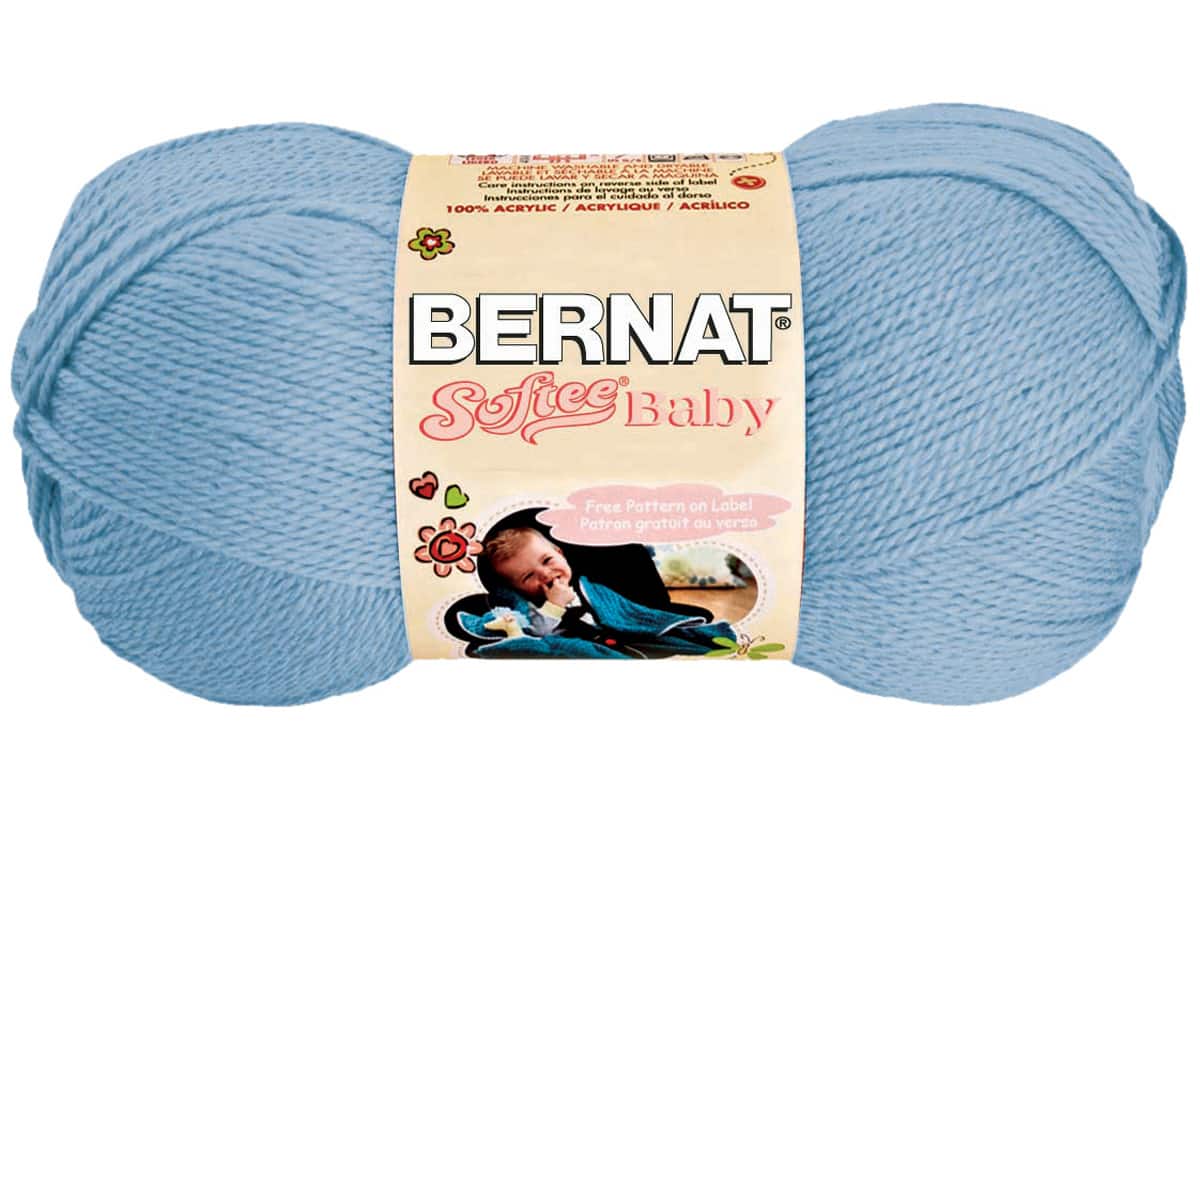 Bernat Softee Baby Cotton Yarn-Pale Periwinkle, 1 count - Fry's Food Stores